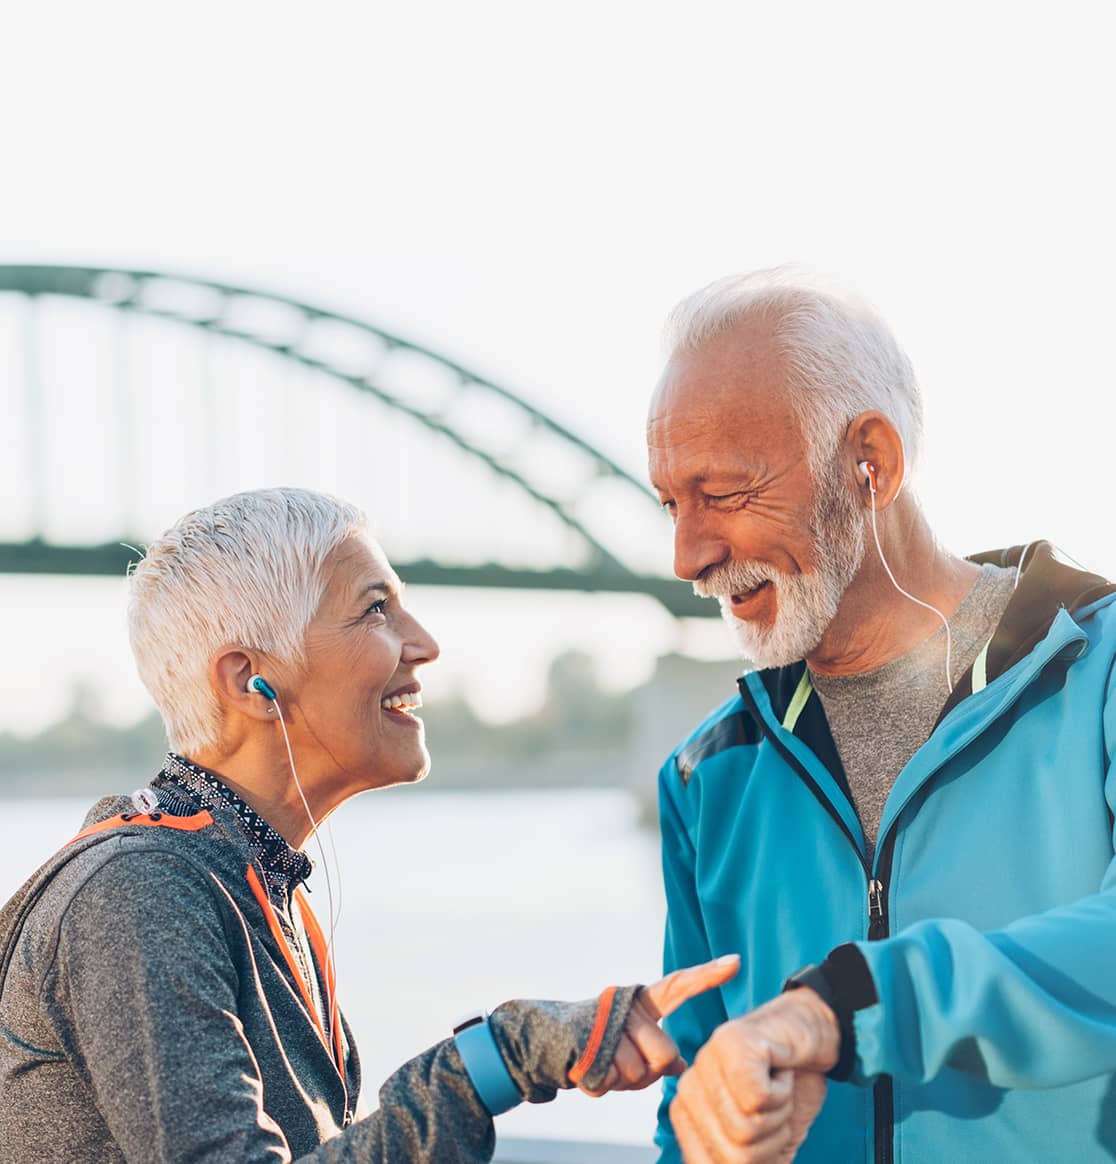 Shop for heart health products, showing a senior couple comparing exercise results outdoors